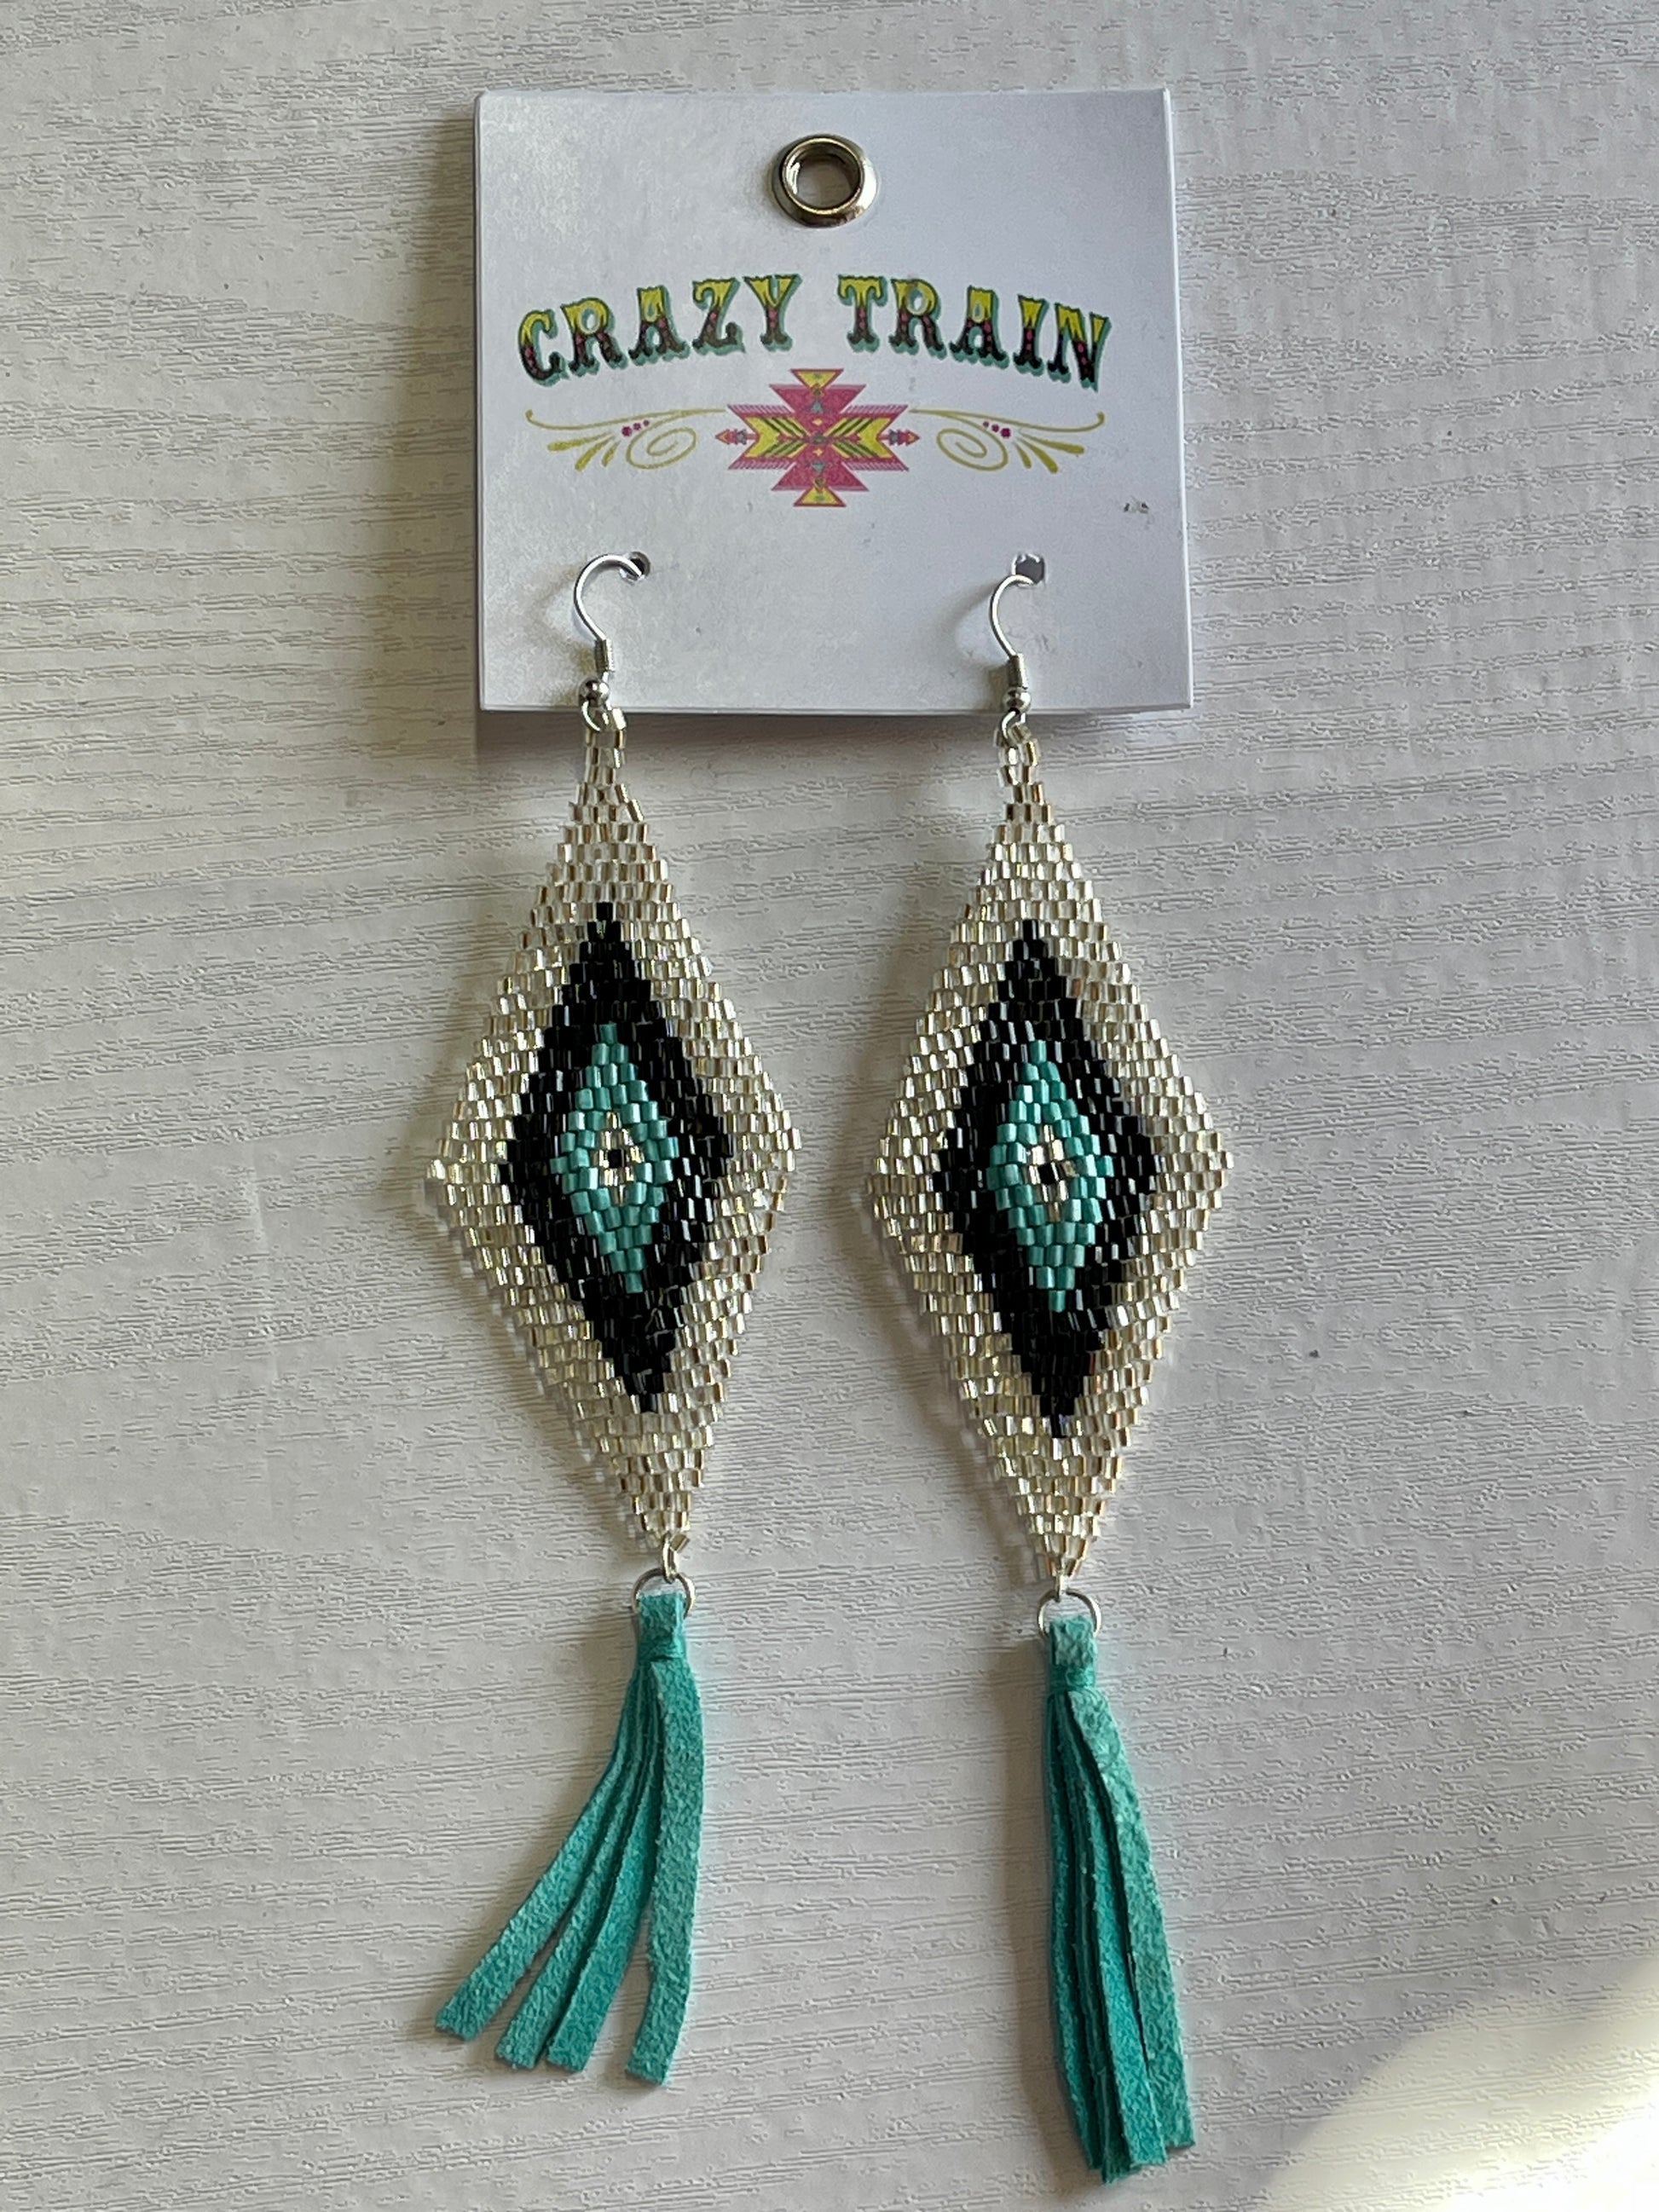 Silver, teal, and black diamond shaped earrings with teal leather tassels at the bottom.